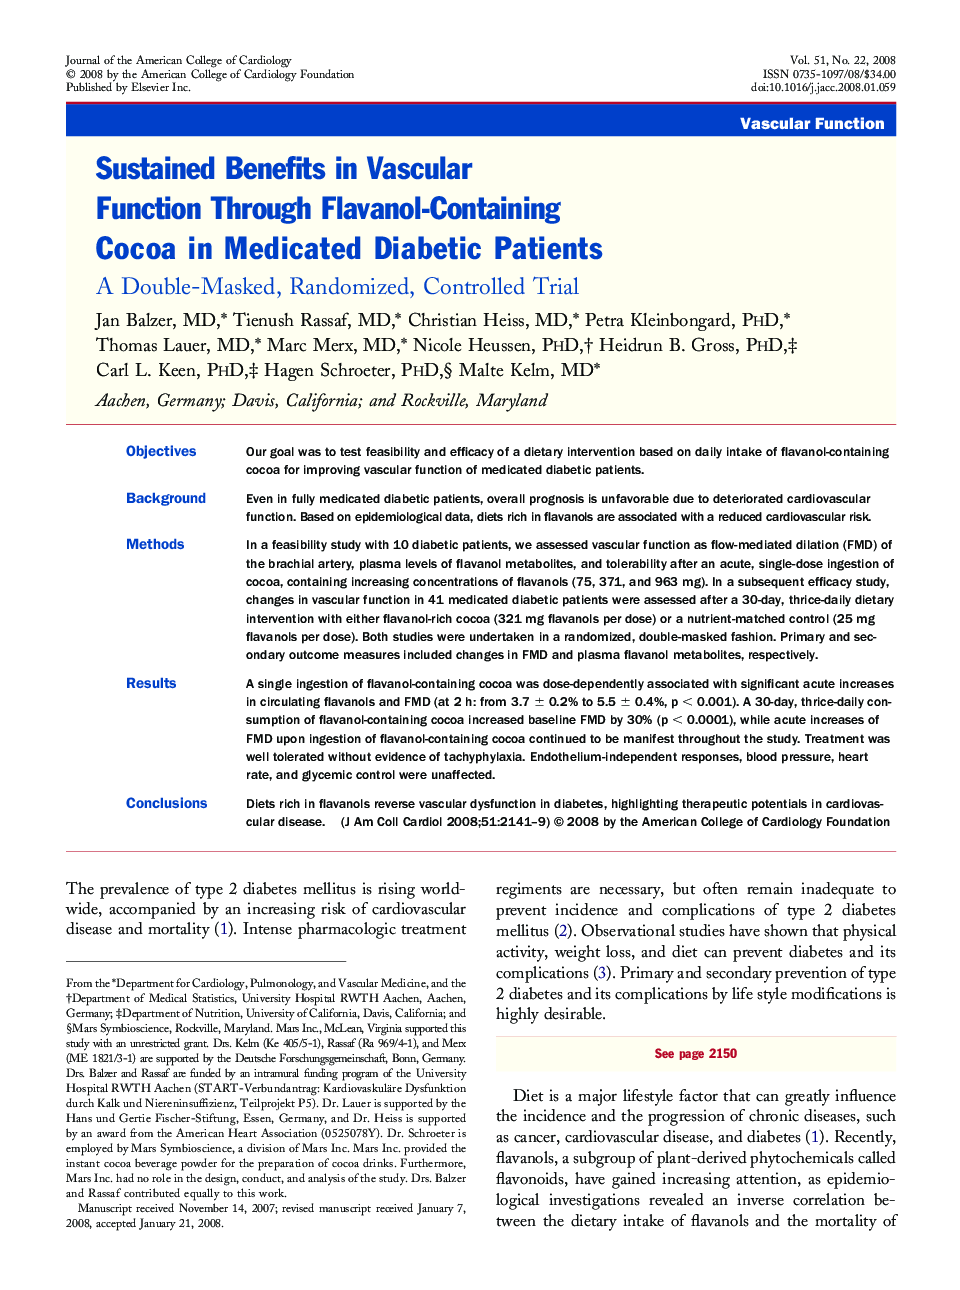 Sustained Benefits in Vascular Function Through Flavanol-Containing Cocoa in Medicated Diabetic Patients : A Double-Masked, Randomized, Controlled Trial